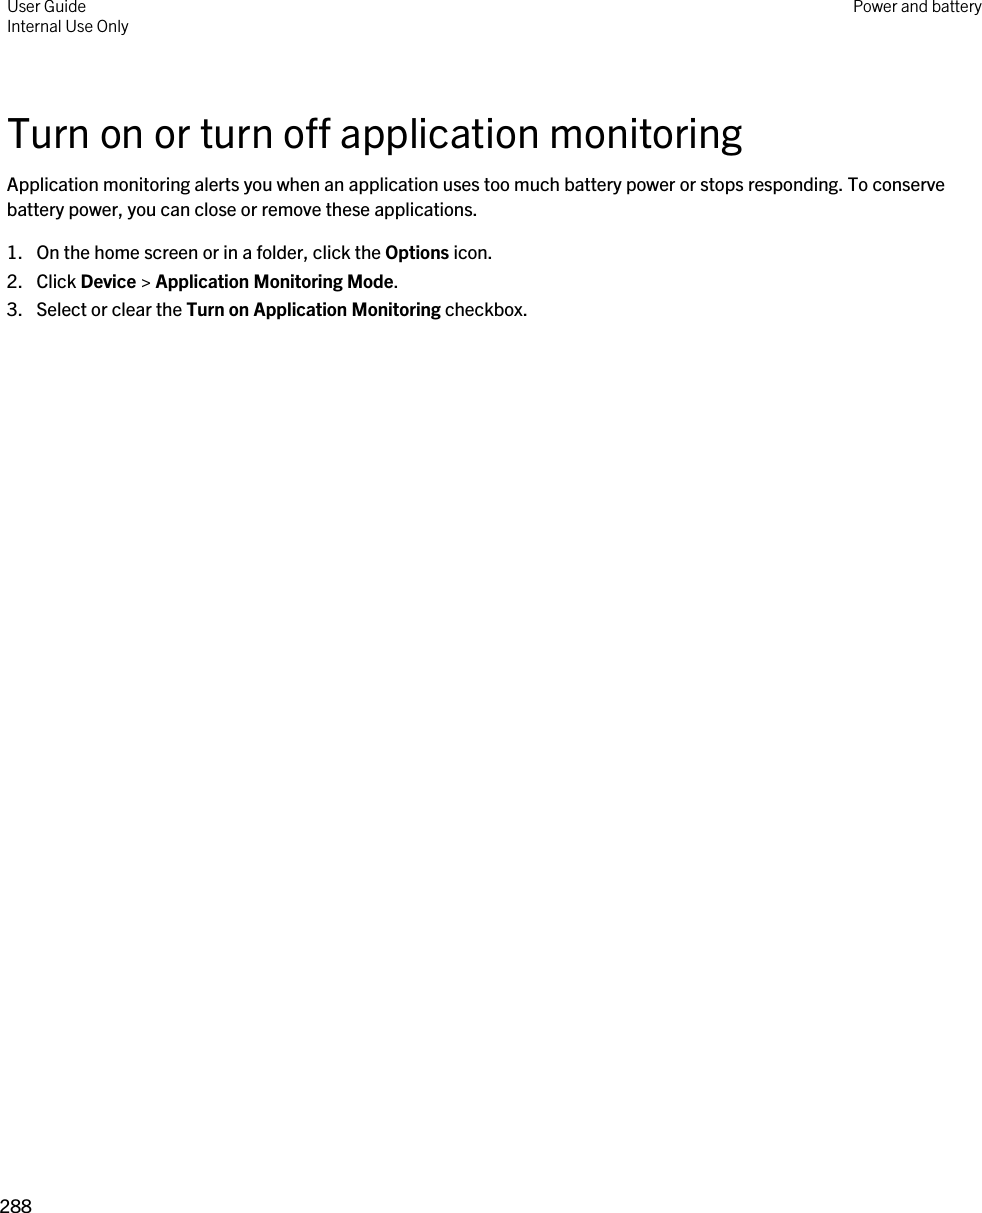 Turn on or turn off application monitoringApplication monitoring alerts you when an application uses too much battery power or stops responding. To conserve battery power, you can close or remove these applications.1. On the home screen or in a folder, click the Options icon.2. Click Device &gt; Application Monitoring Mode.3. Select or clear the Turn on Application Monitoring checkbox.User GuideInternal Use Only Power and battery288 